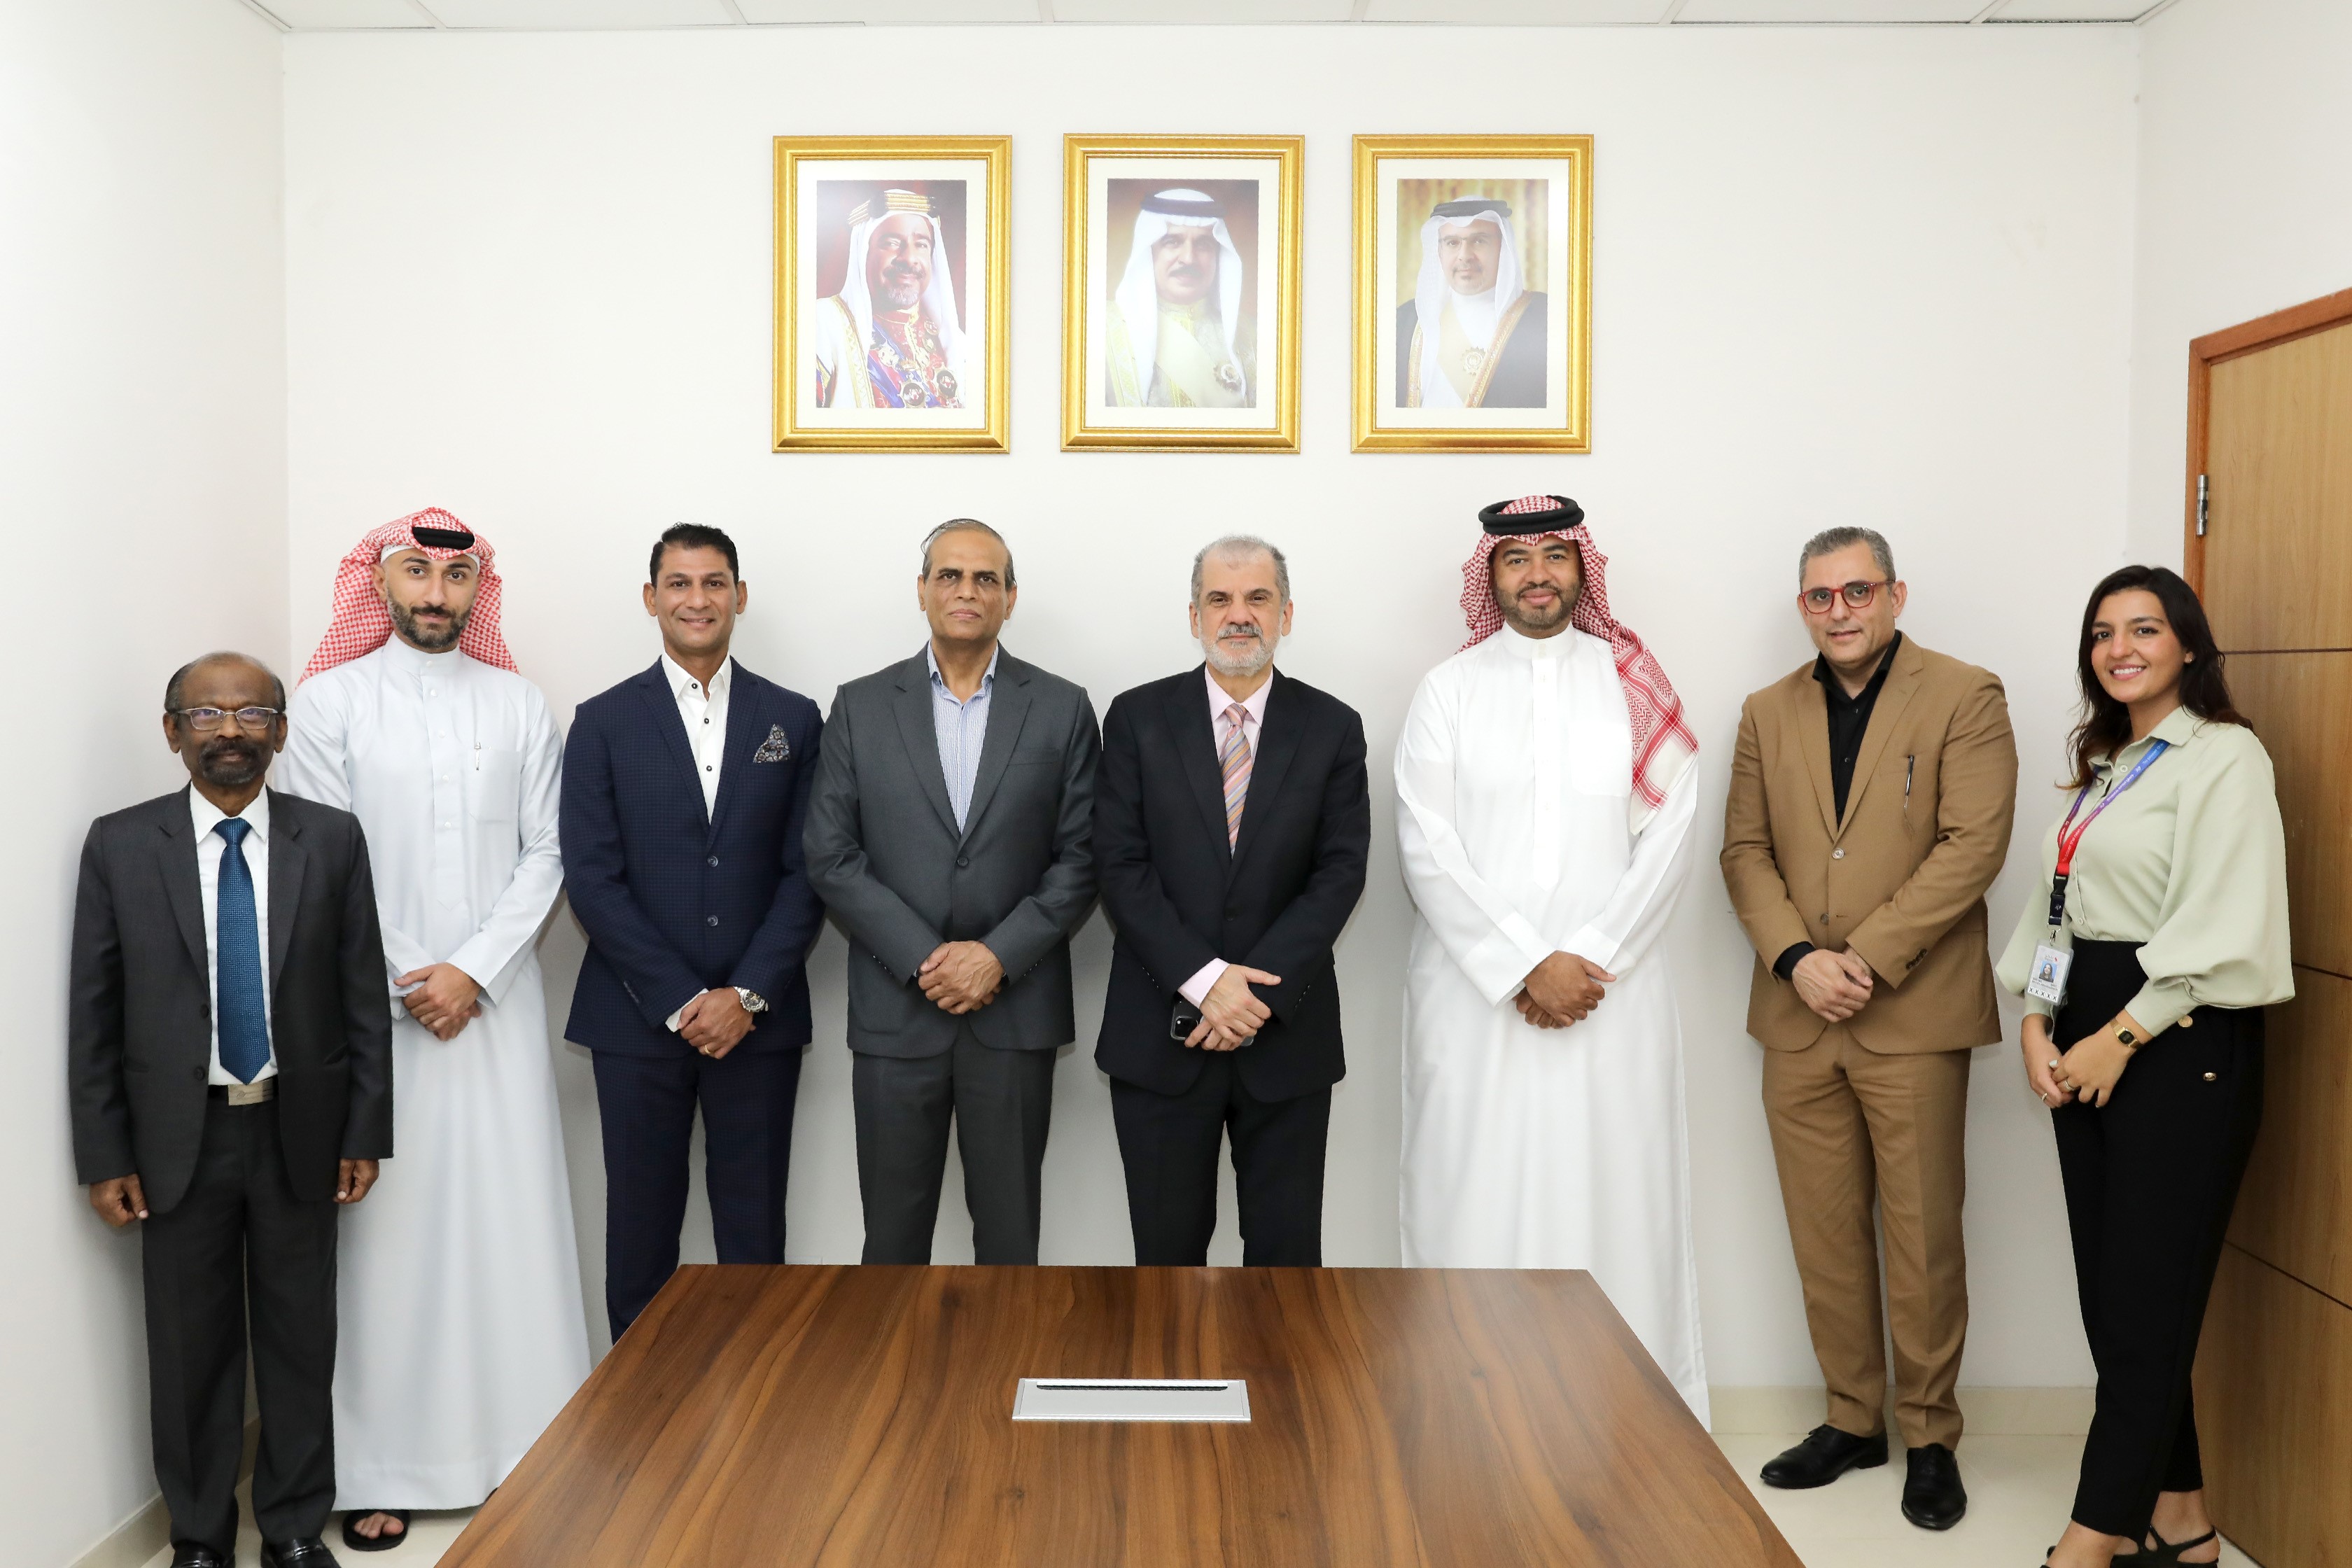 “Bapco Tazweed” Signs a Strategic Agreement with Four Square Media and Display Solutions